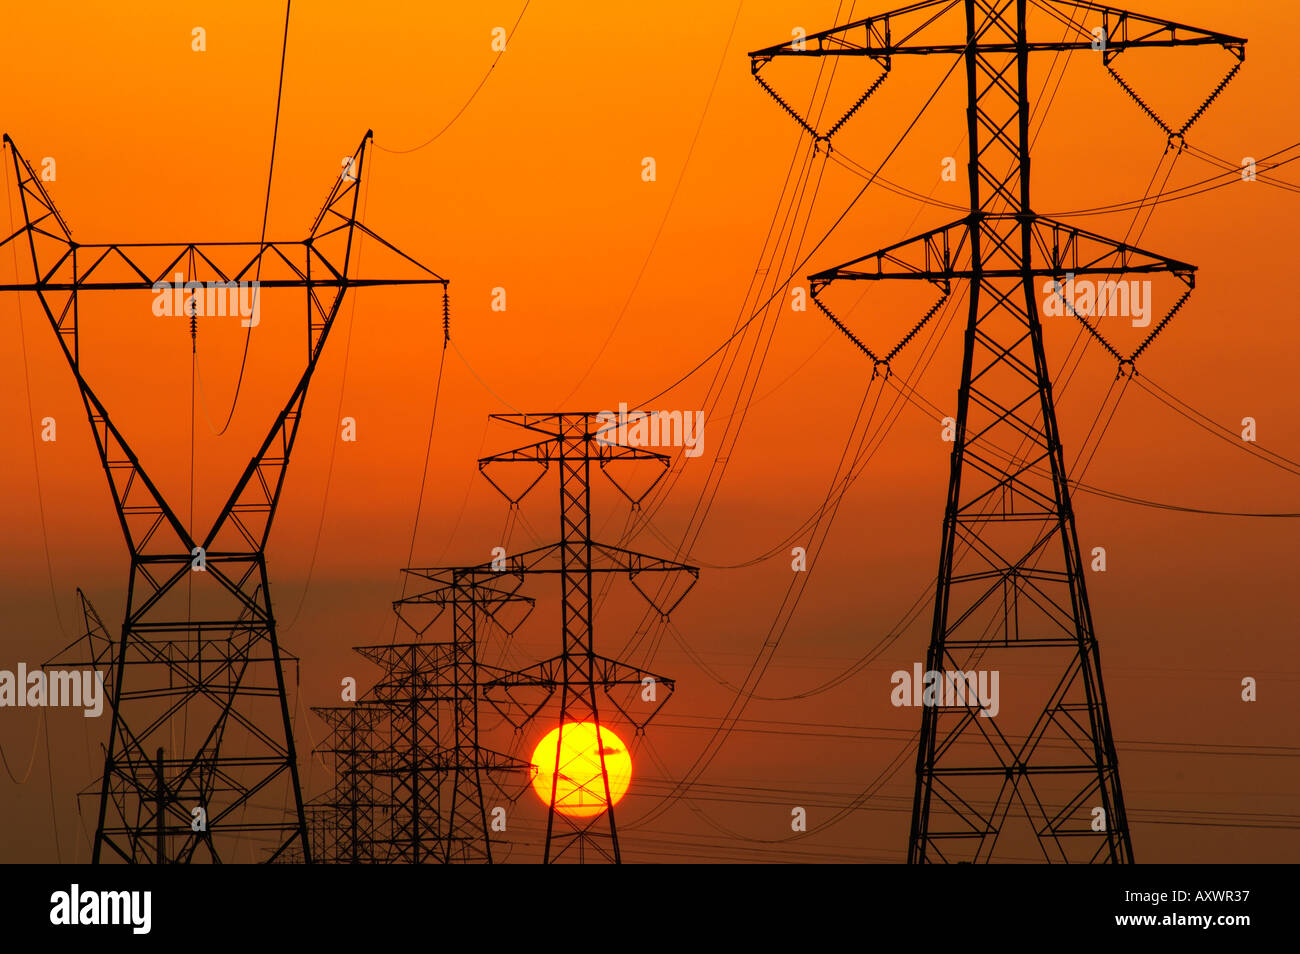 Power lines and setting sun represent two options for meeting power demand Stock Photo